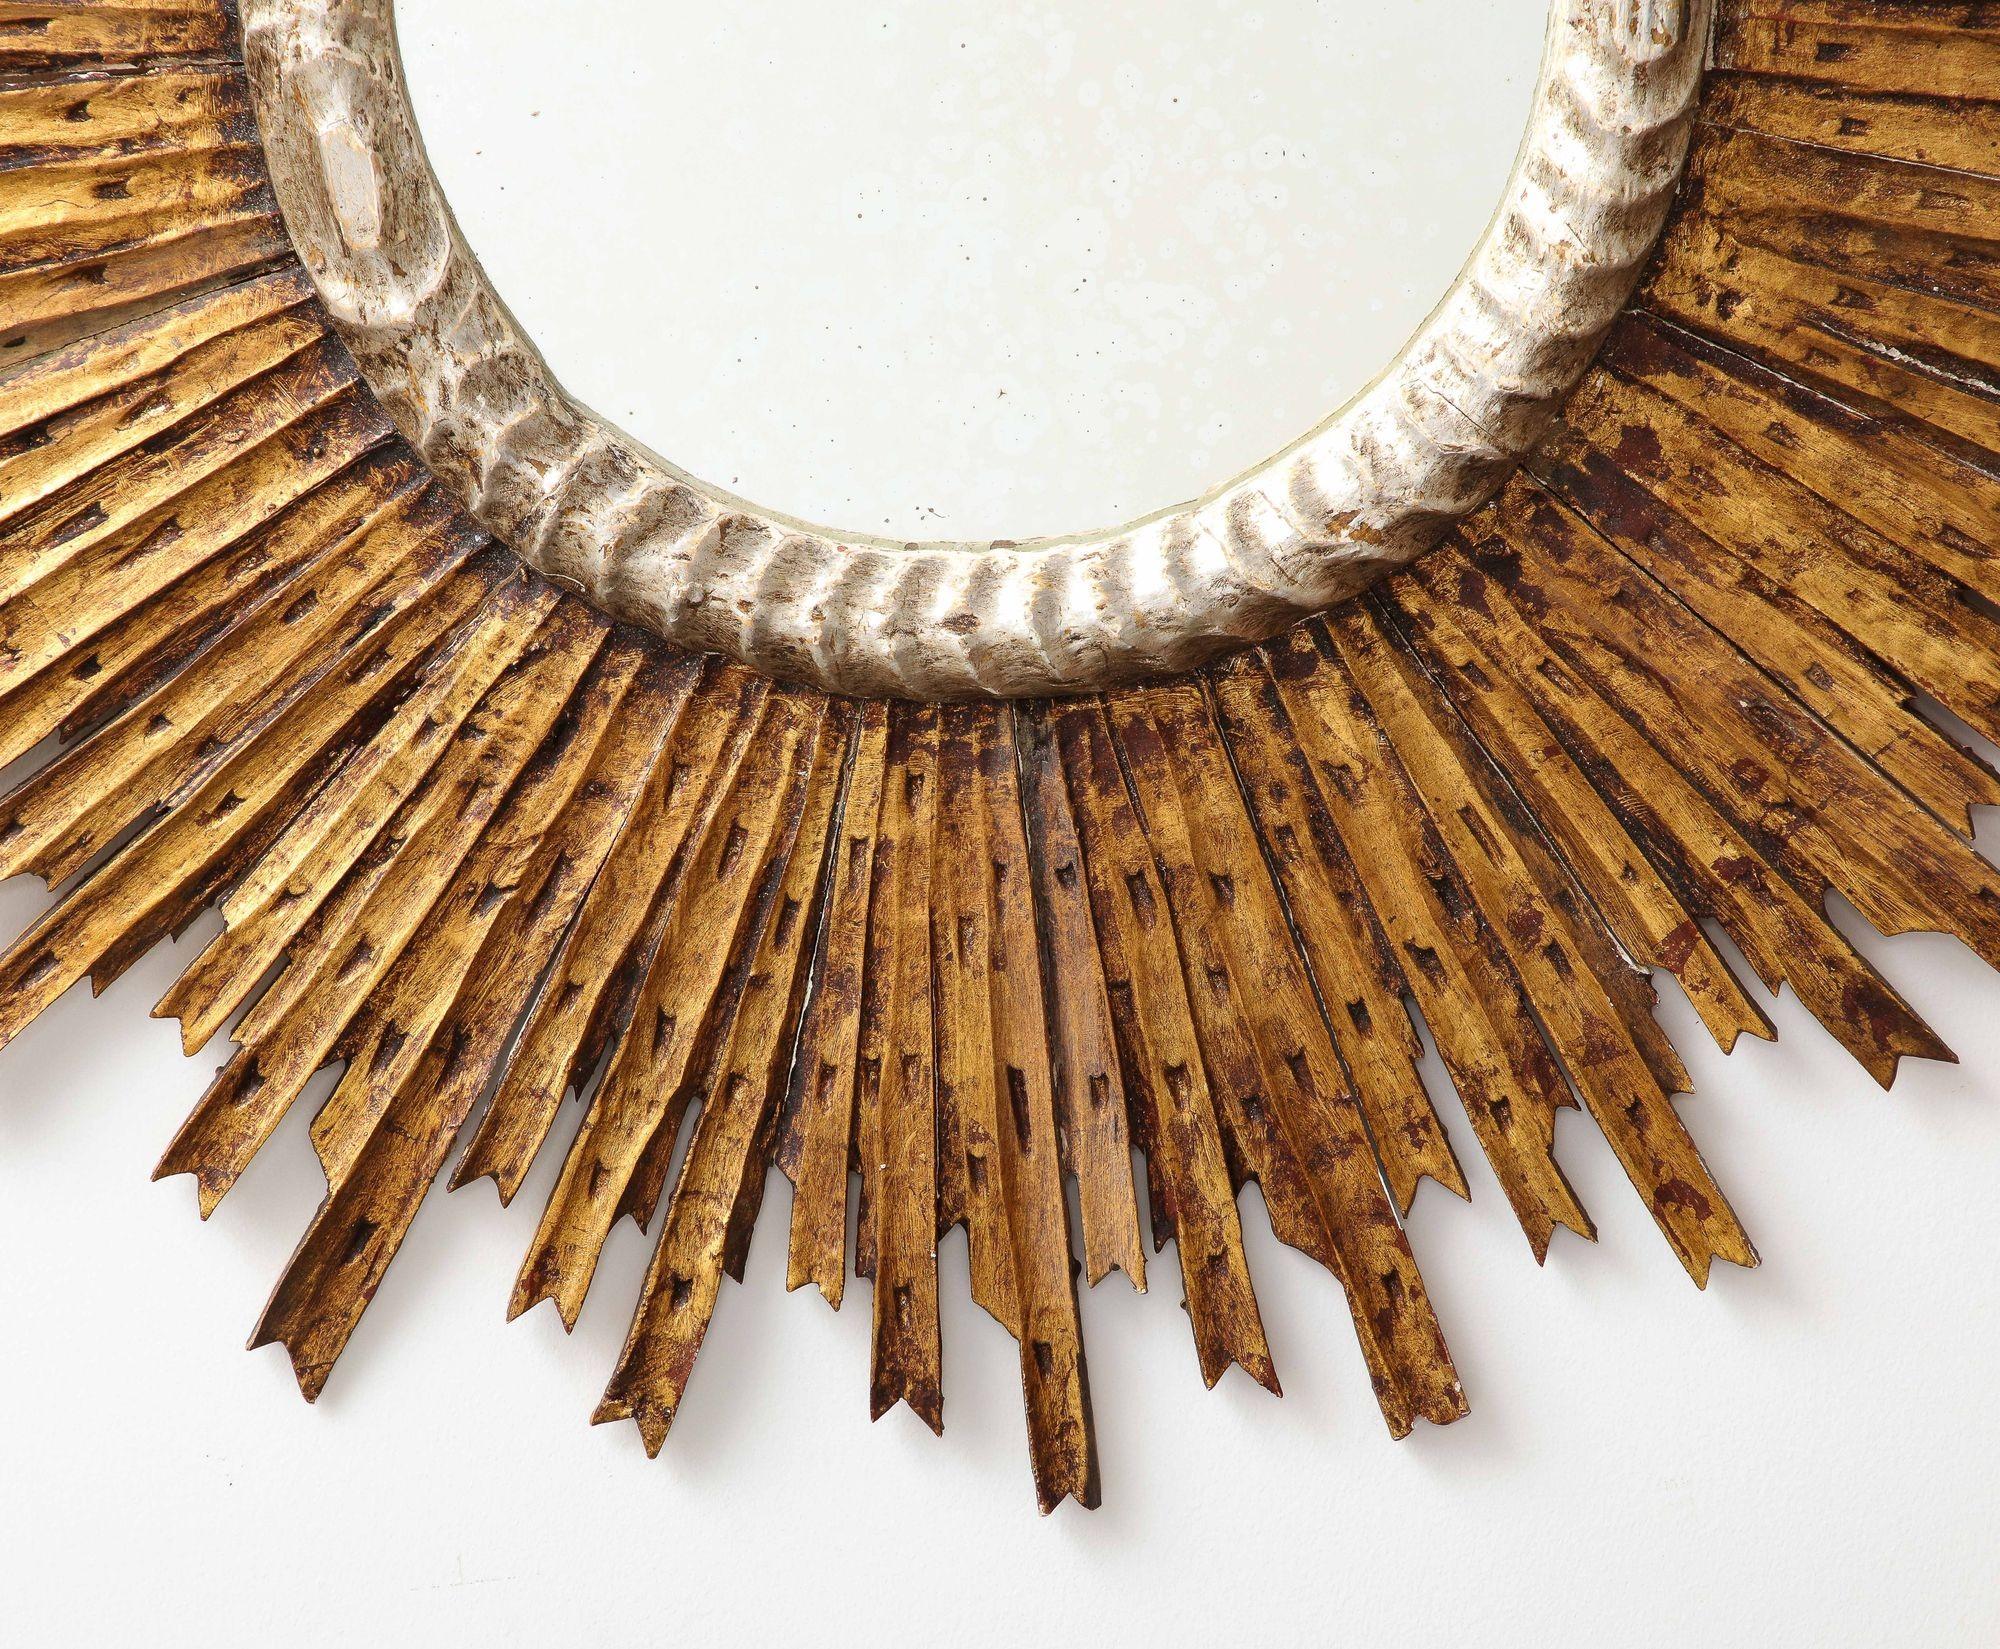 An exquisite classic Sunburst mirror, featuring a gold wood frame adorned with an inner silver rim, hailing from the mid 20th century. This striking piece offers a captivating visual centerpiece, with its radiating beams extending outwards from the